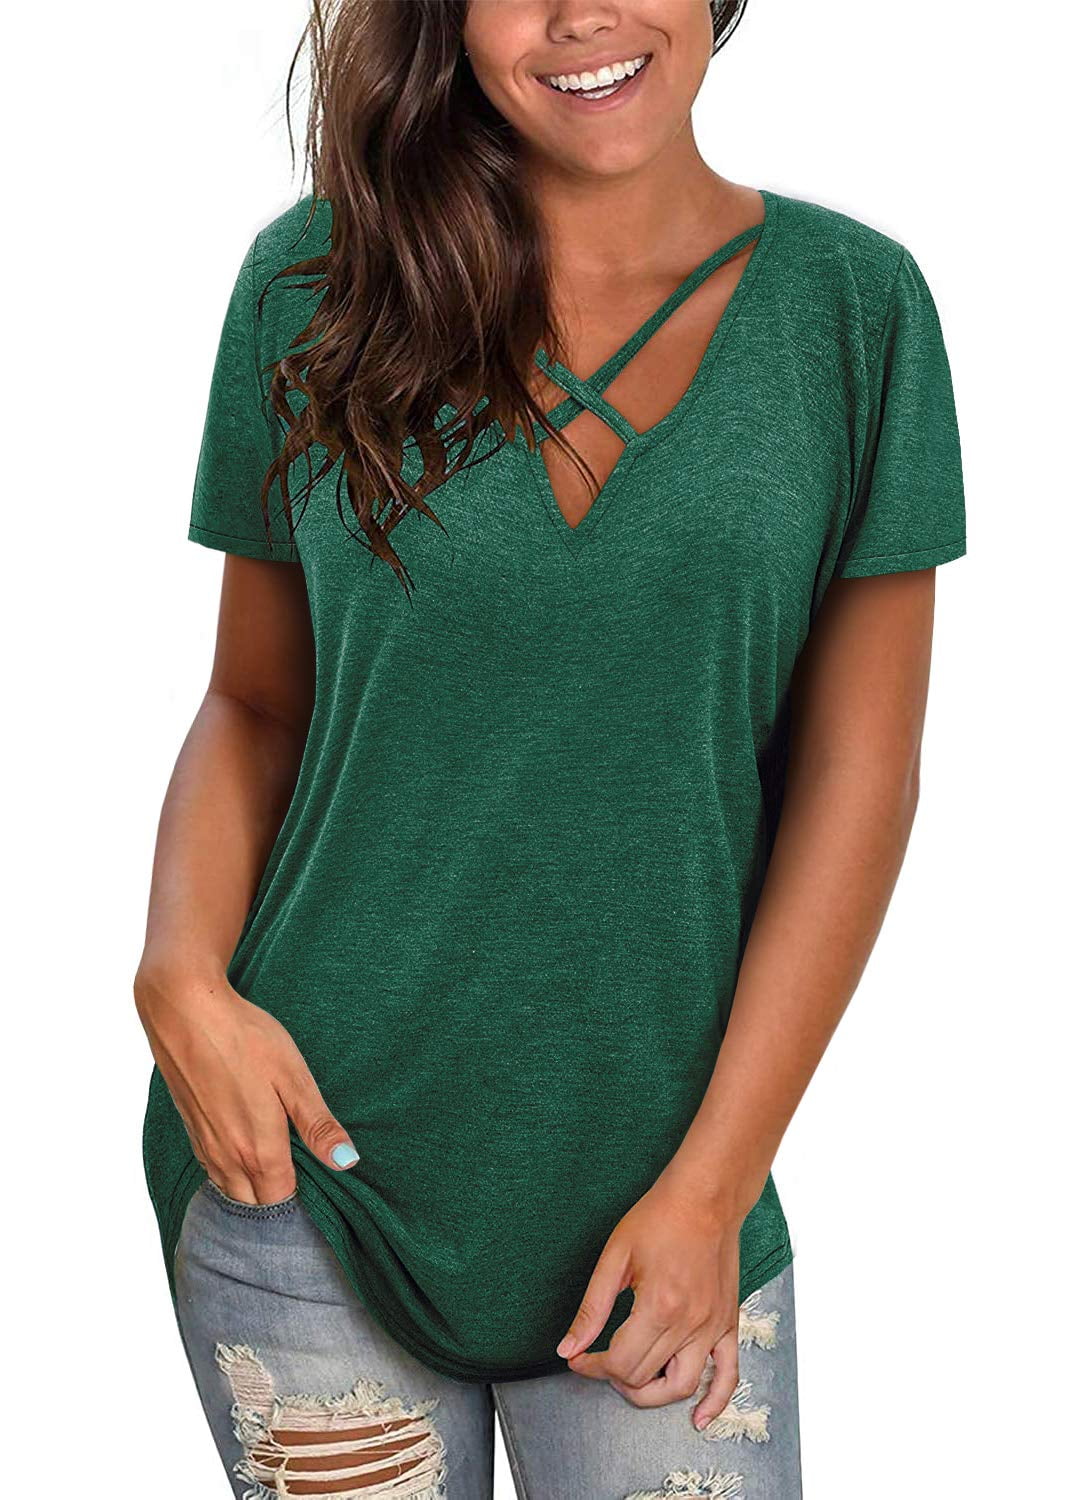 Sherrylily Womens V Neck Short Sleeve T Shirts Criss Cross Casual Loose  Cotton Tees Tops 